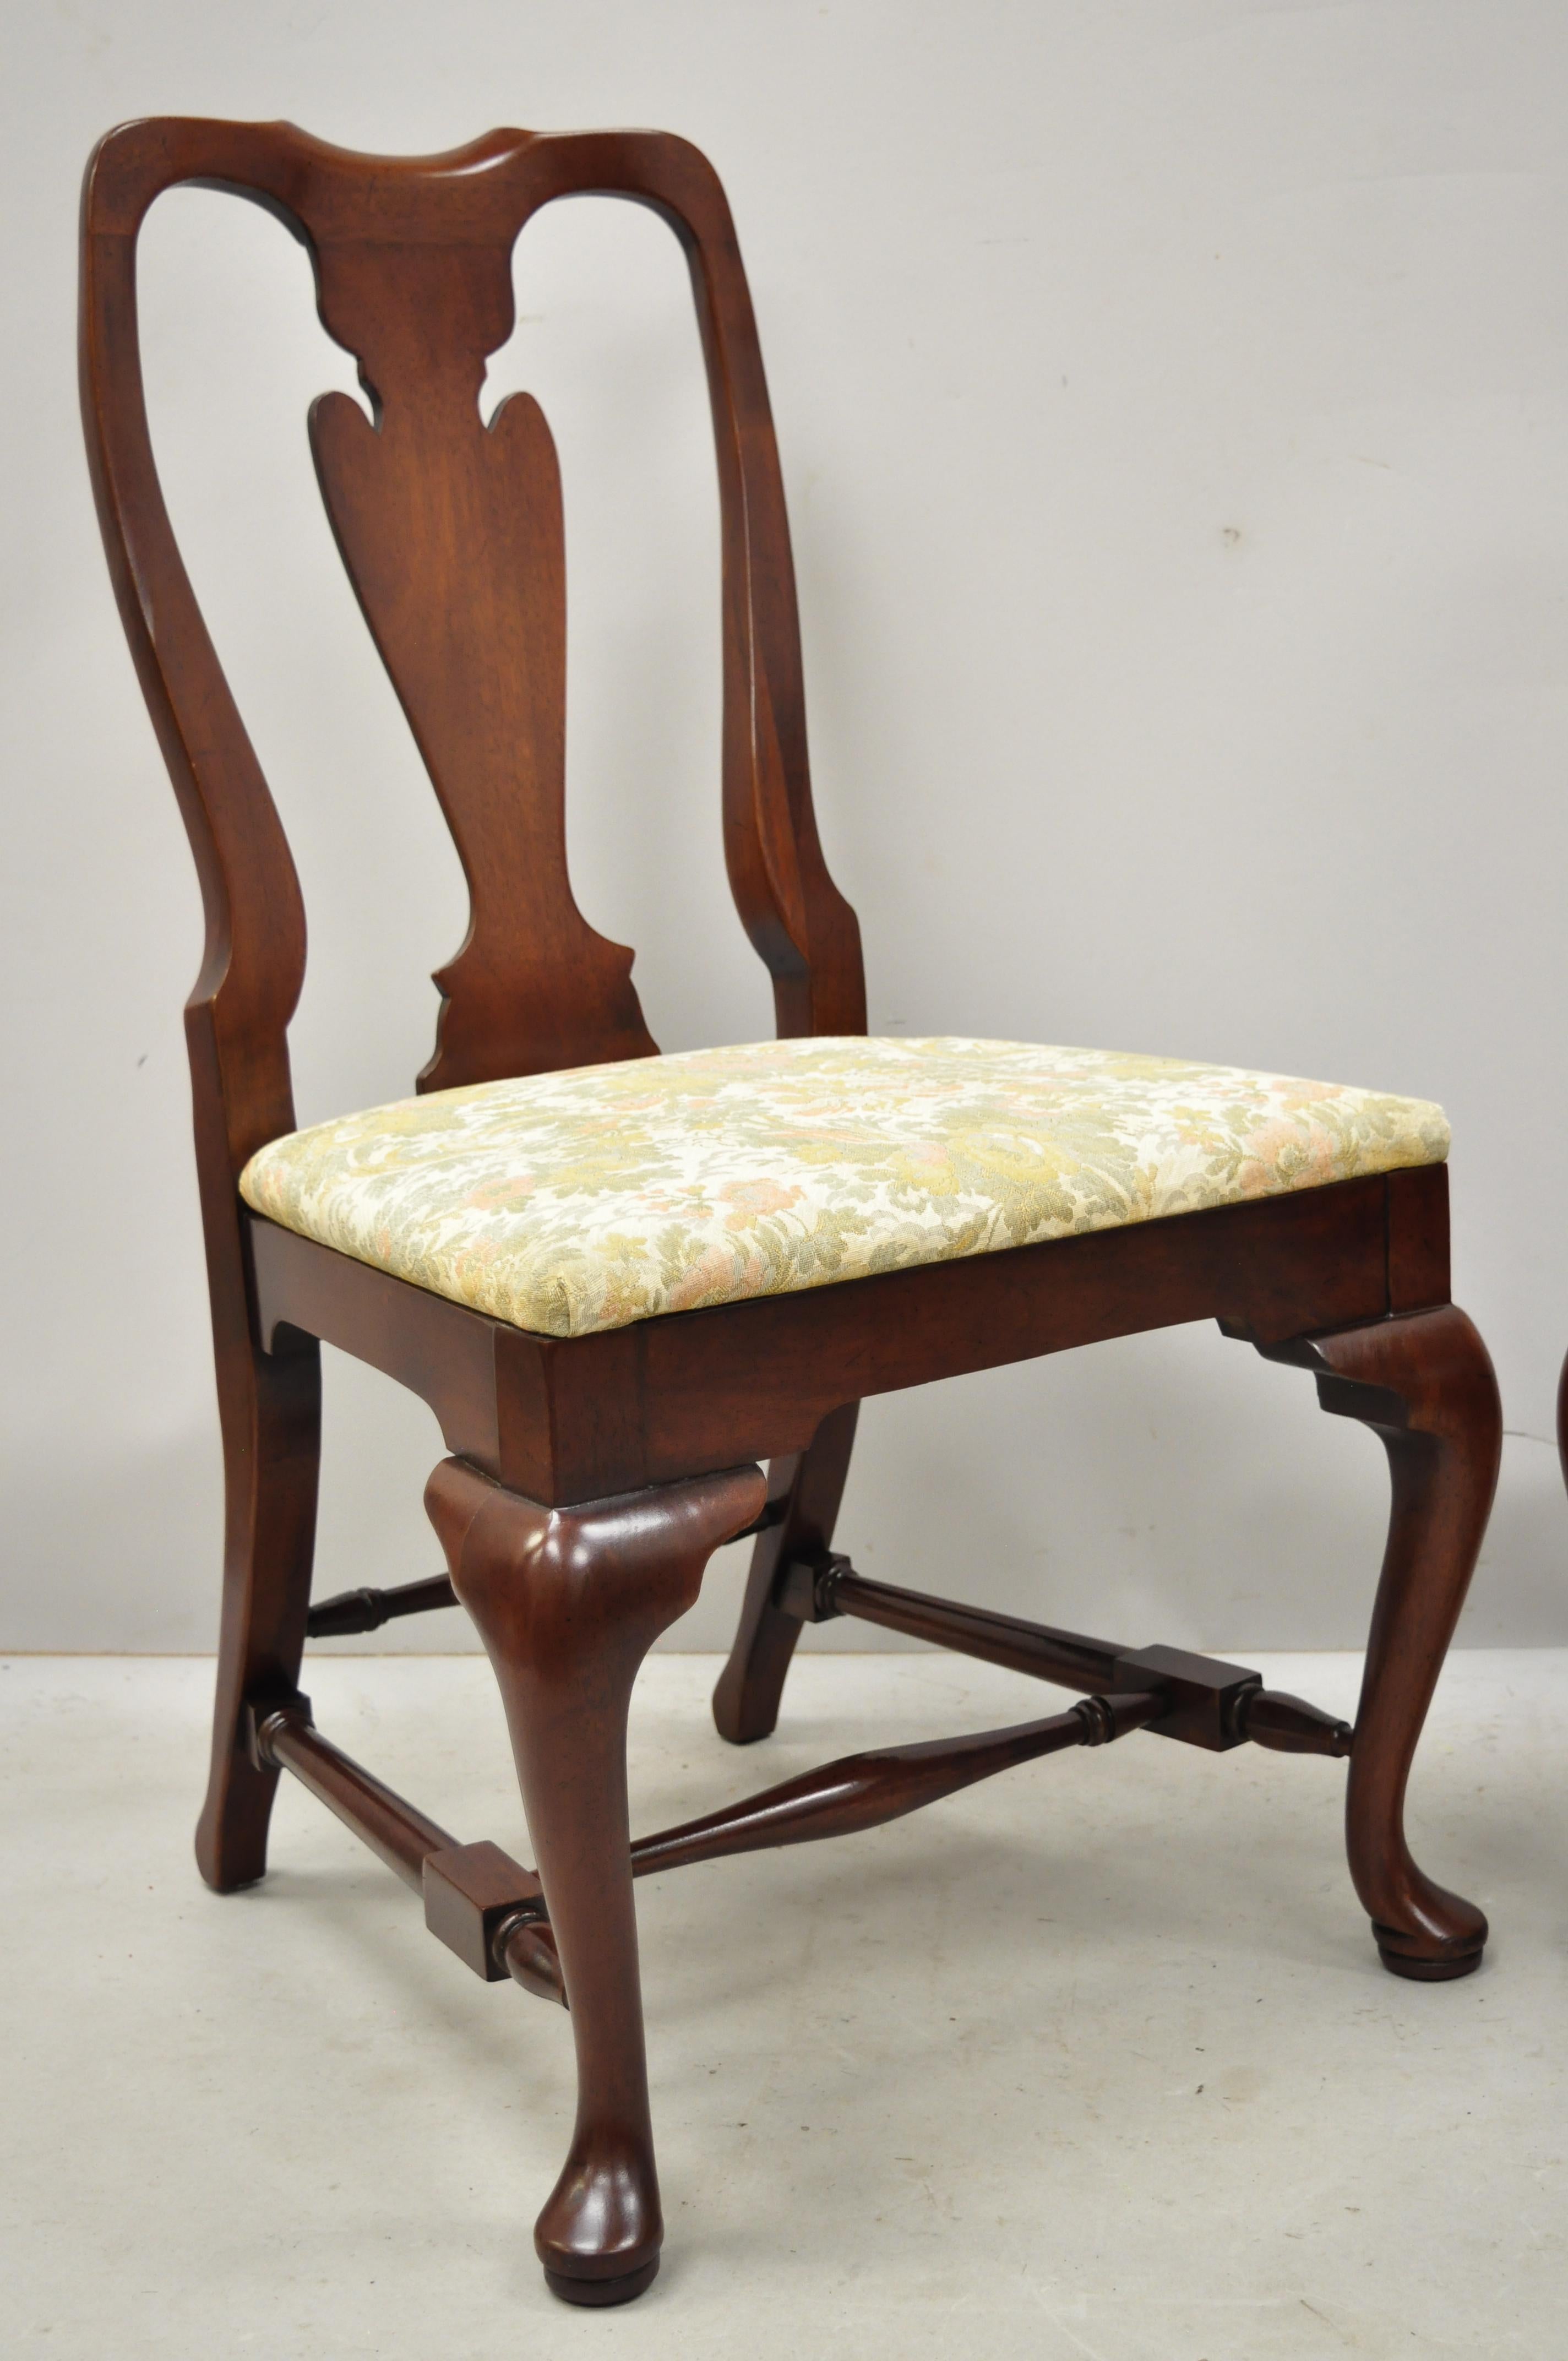 Vintage solid cherrywood queen Anne style stretcher base dining side chairs. Item features solid wood construction, beautiful wood grain, shapely queen Anne legs, quality American craftsmanship,
circa mid-late 20th century. Measurements: 38